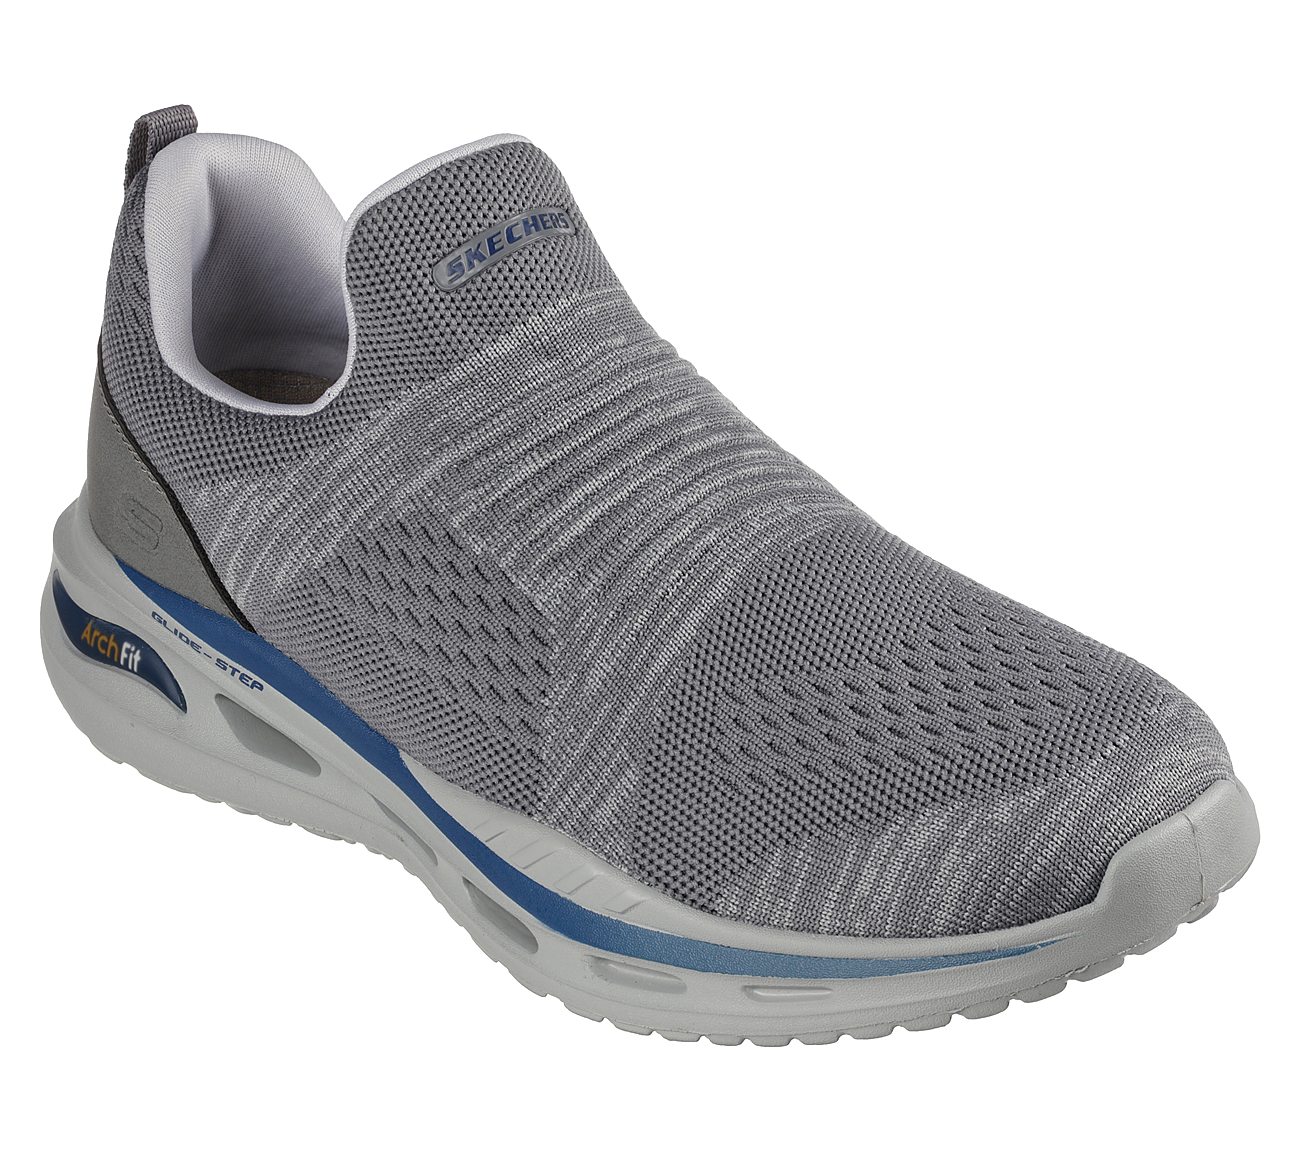 ARCH FIT ORVAN - DENISON, GREY Footwear Lateral View